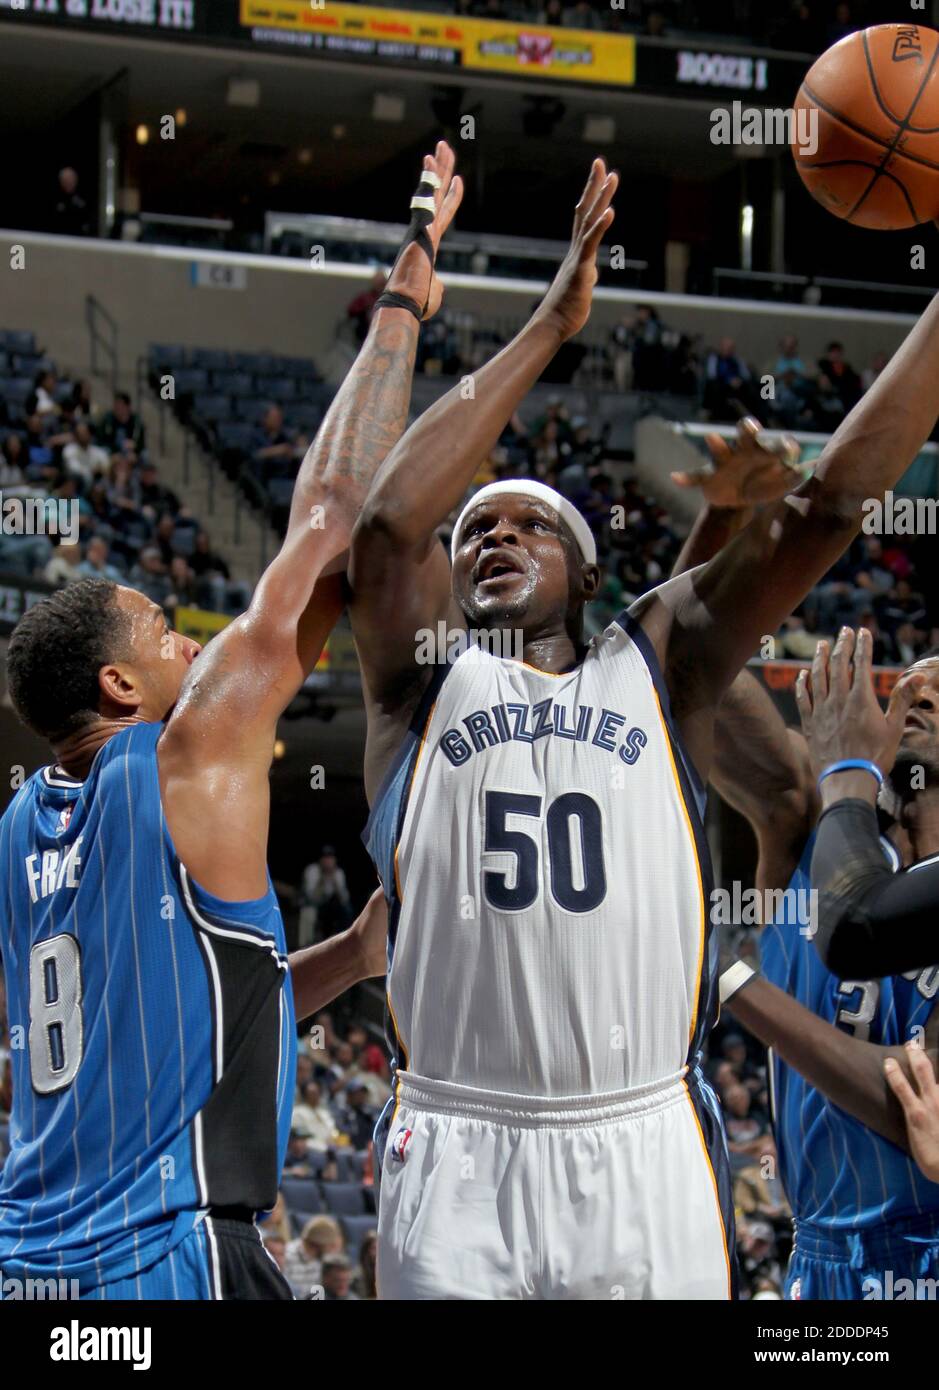 NO FILM, NO VIDEO, NO TV, NO DOCUMENTARY - Memphis Grizzlies' Zach Randolph shoots defended by Orlando Magic's Channing Frye, left, and Dewayne Dedmon, right, at FedExForum in Memphis, TN, USA on on January 26, 2015. Photo by Nikki Boertman/The Commercial Appeal/TNS/ABACAPRESS.COM Stock Photo